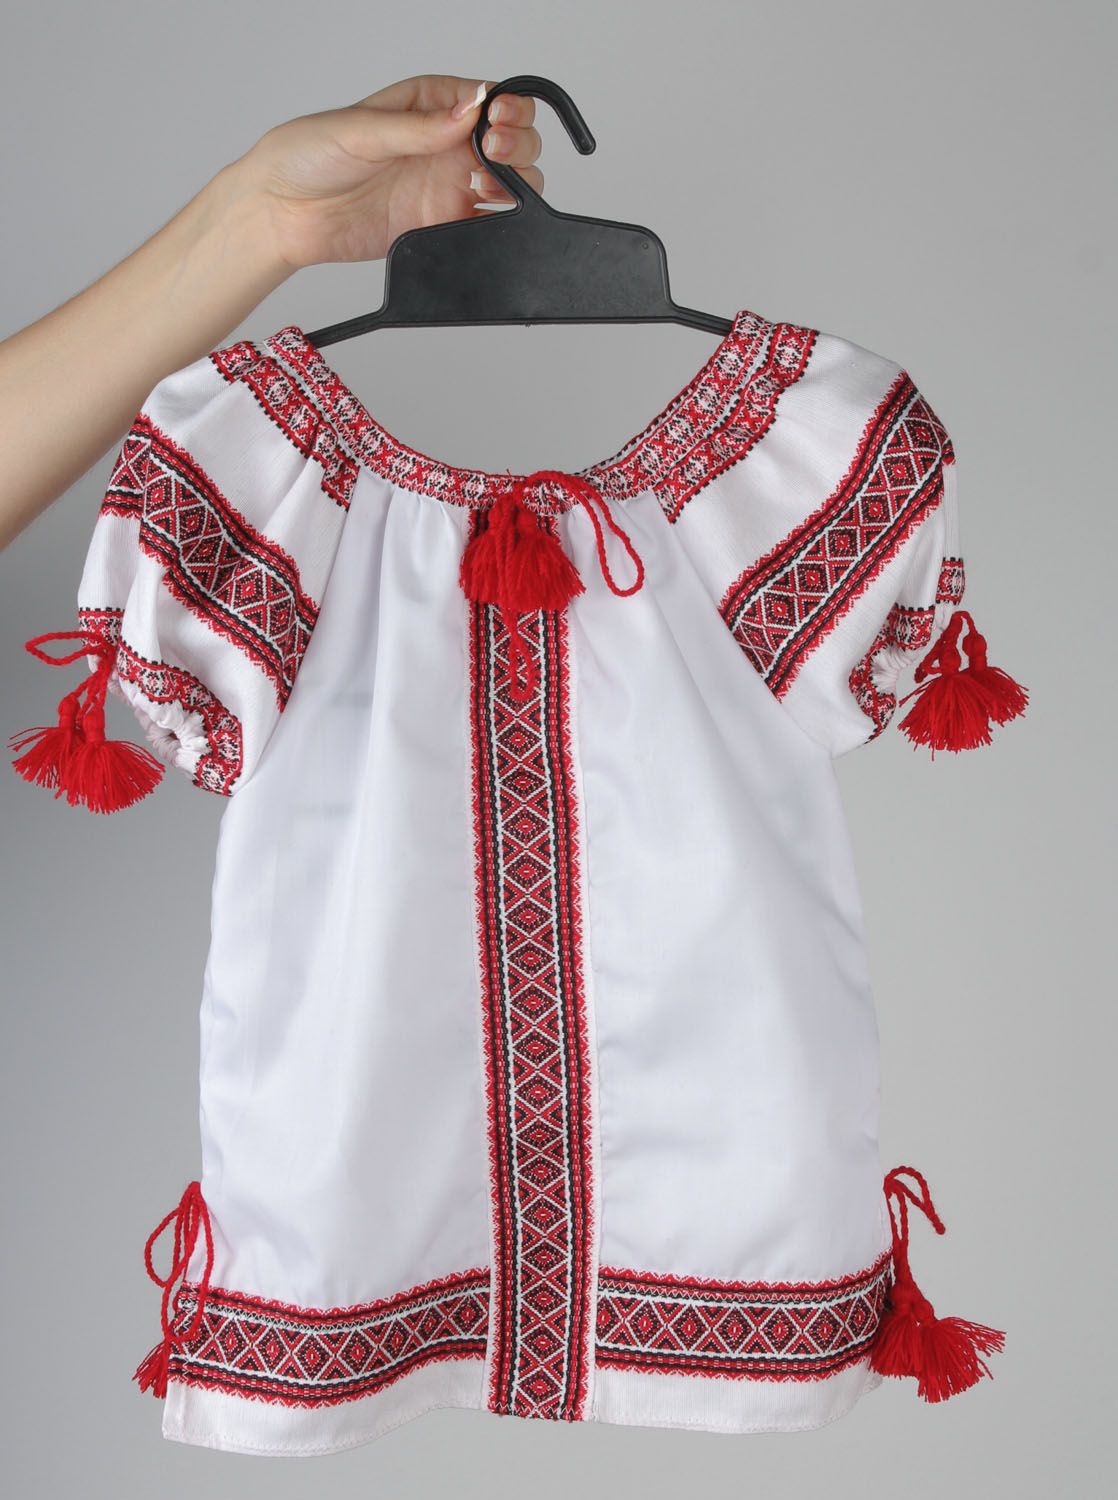 Embroidered baby dress photo 1